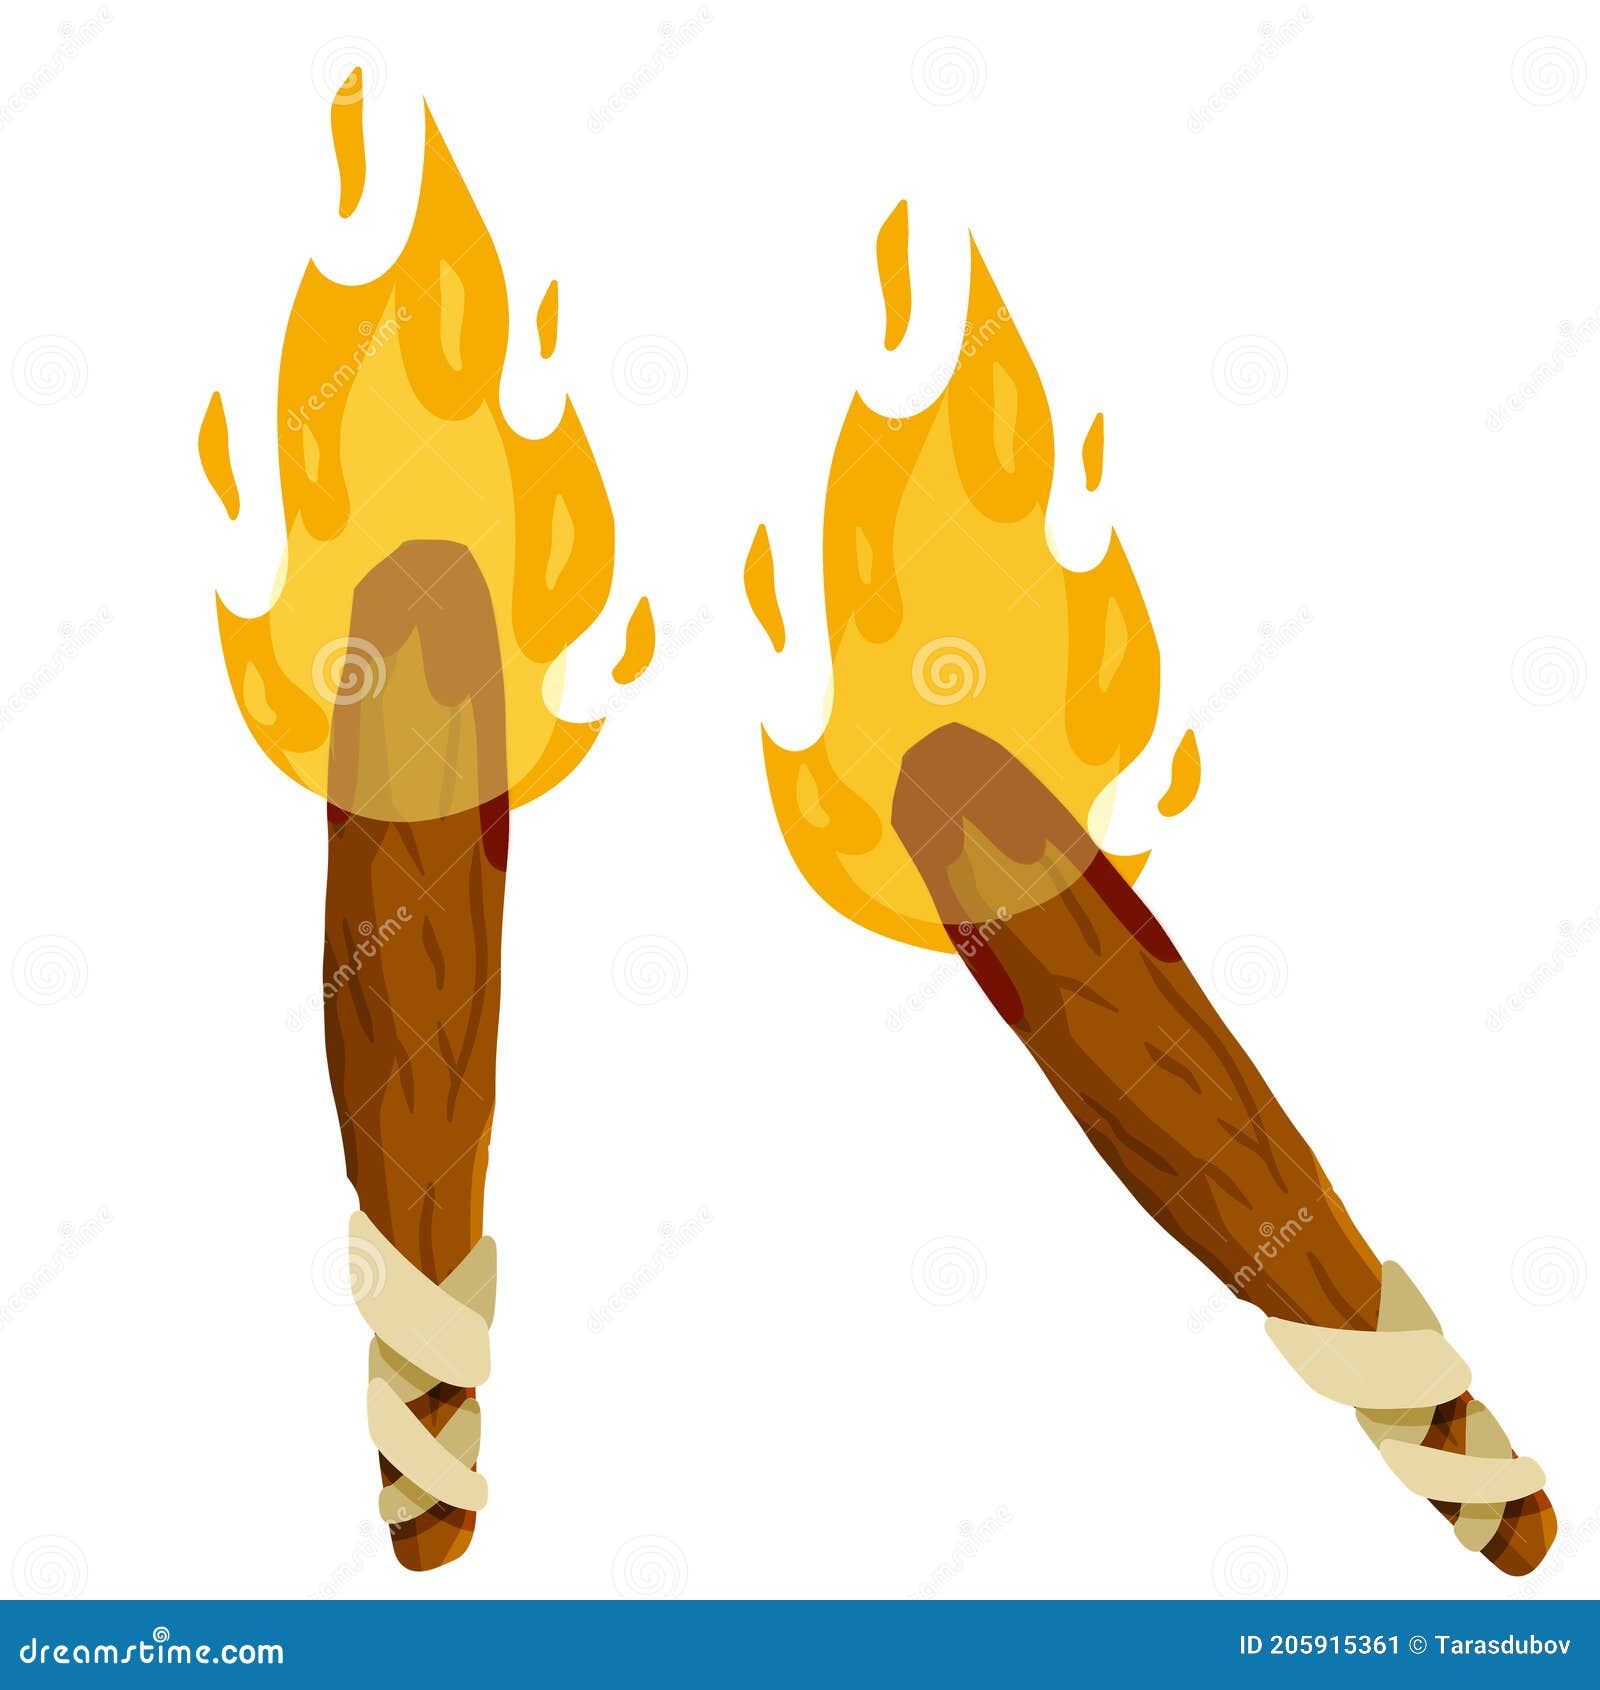 Torch and Flame. Lighting Element. Old Primitive Tool. Flat Cartoon  Illustration. Wooden Stick with Fire Stock Vector - Illustration of lumber,  burn: 205915361